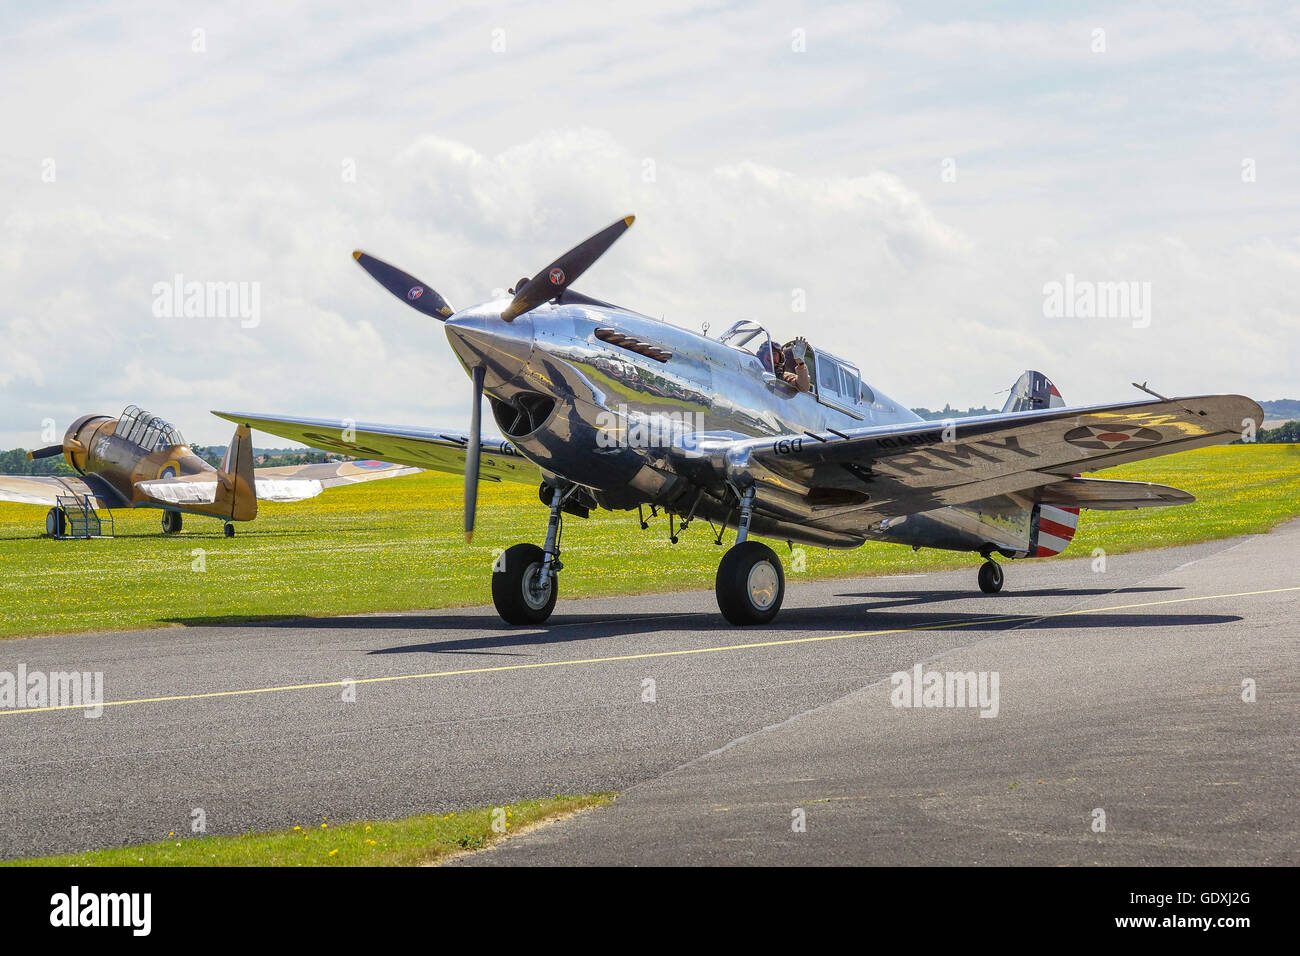 Curtiss P-40 Warhawk is an American single-engined, single-seat, all-metal fighter and ground-attack aircraft that first fle Stock Photo